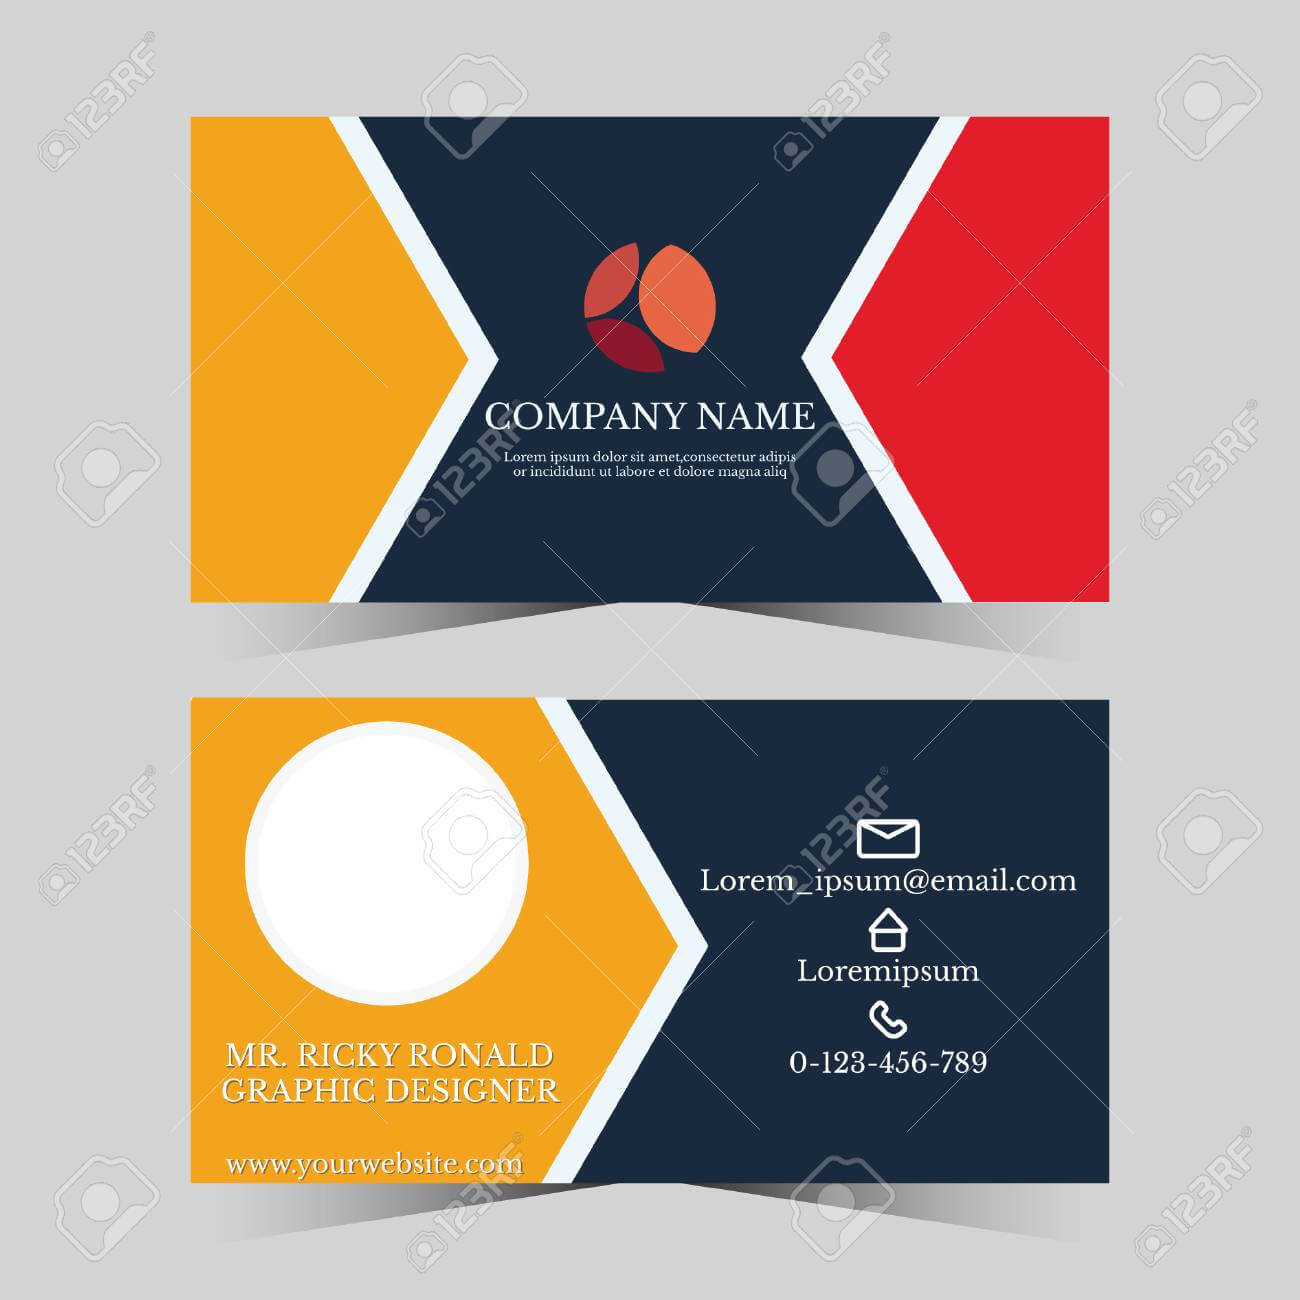 Calling Card Template For Business Man With Geometric Design With Template For Calling Card